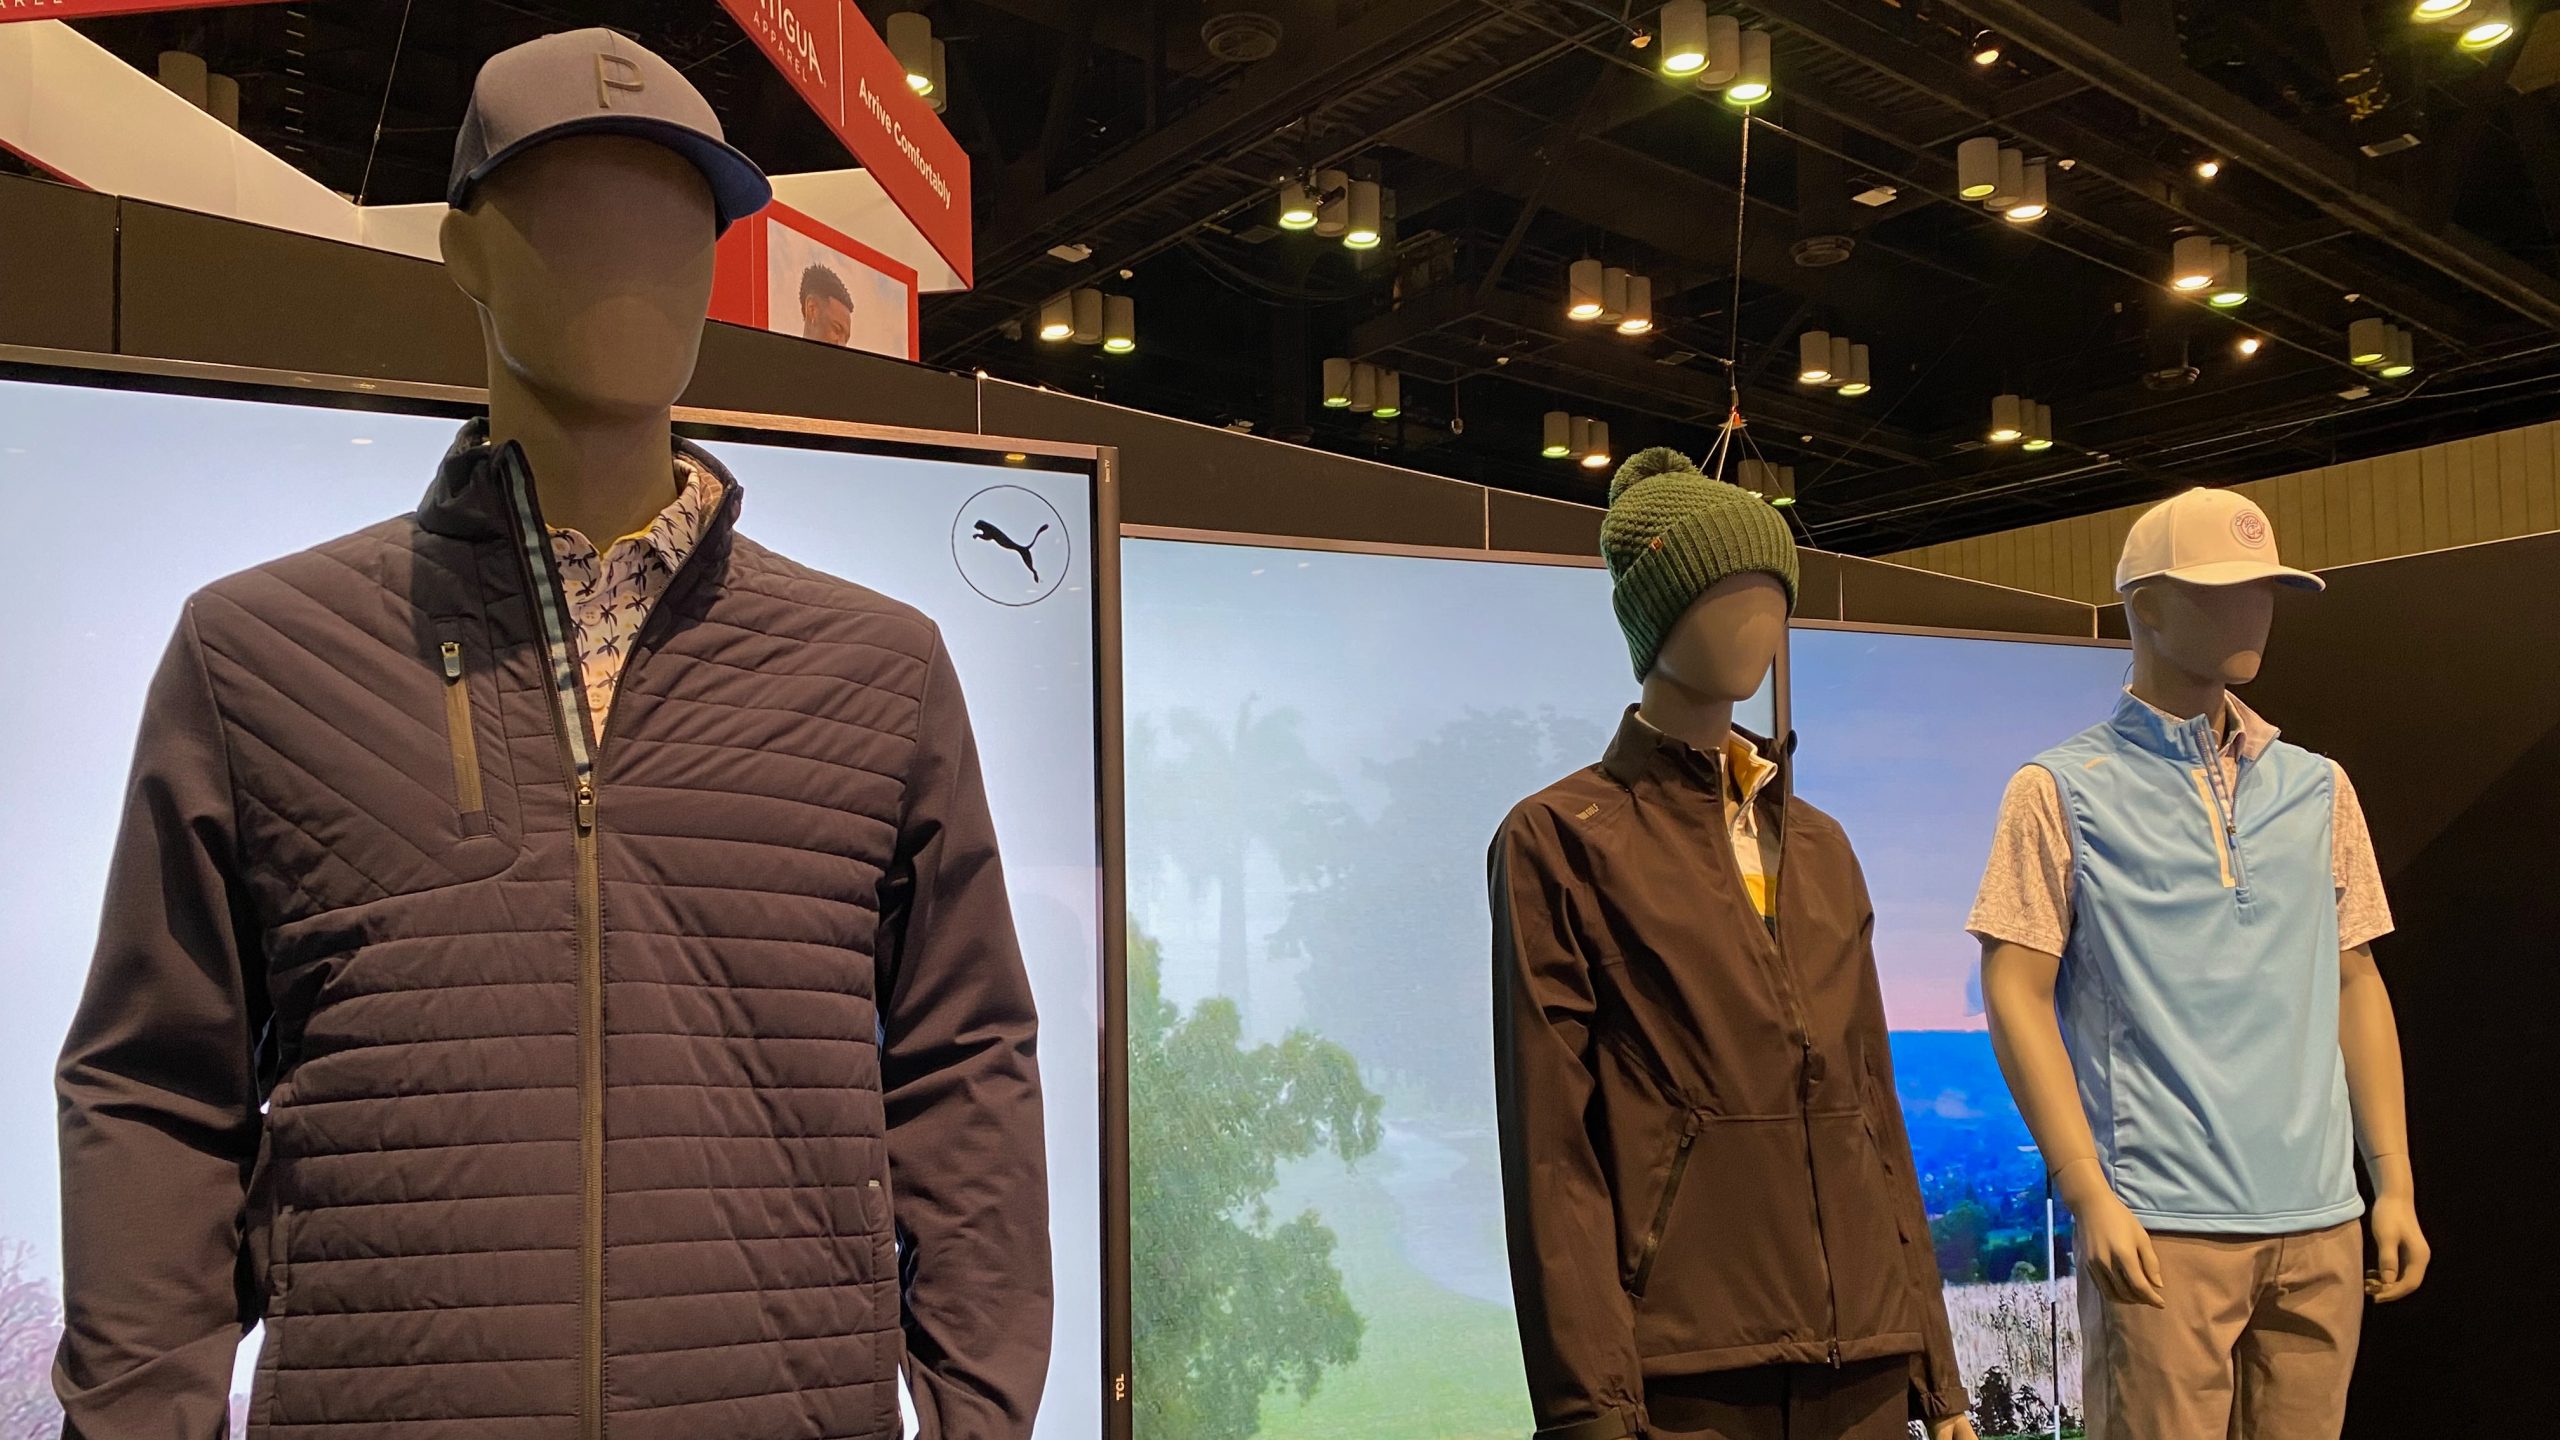 Puma Golf aims to elevate look and feel of brand, change perceptions